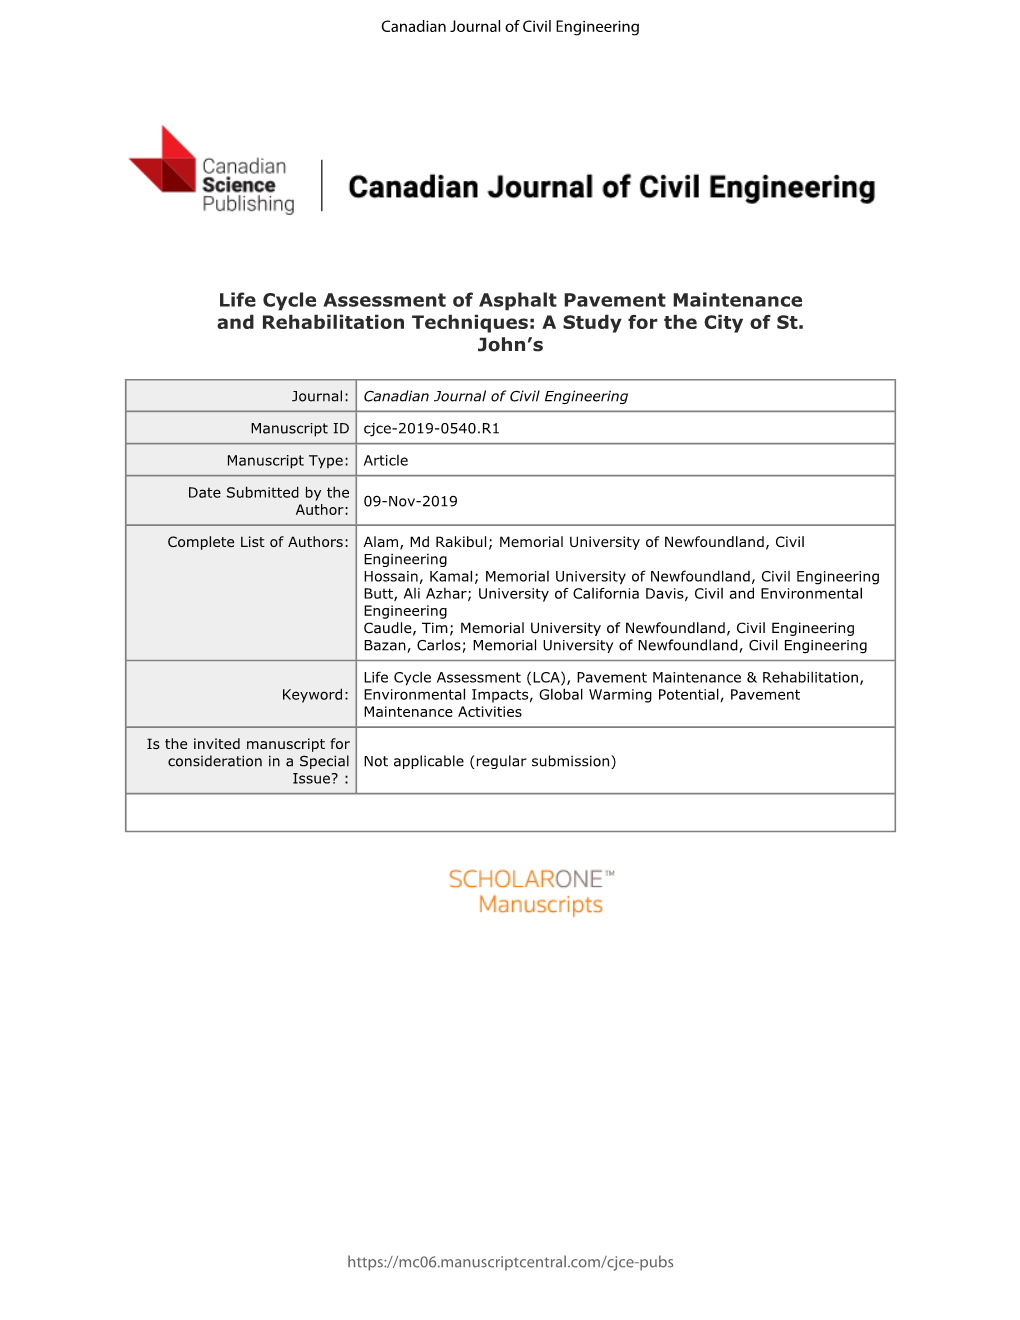 Life Cycle Assessment of Asphalt Pavement Maintenance and Rehabilitation Techniques: a Study for the City of St